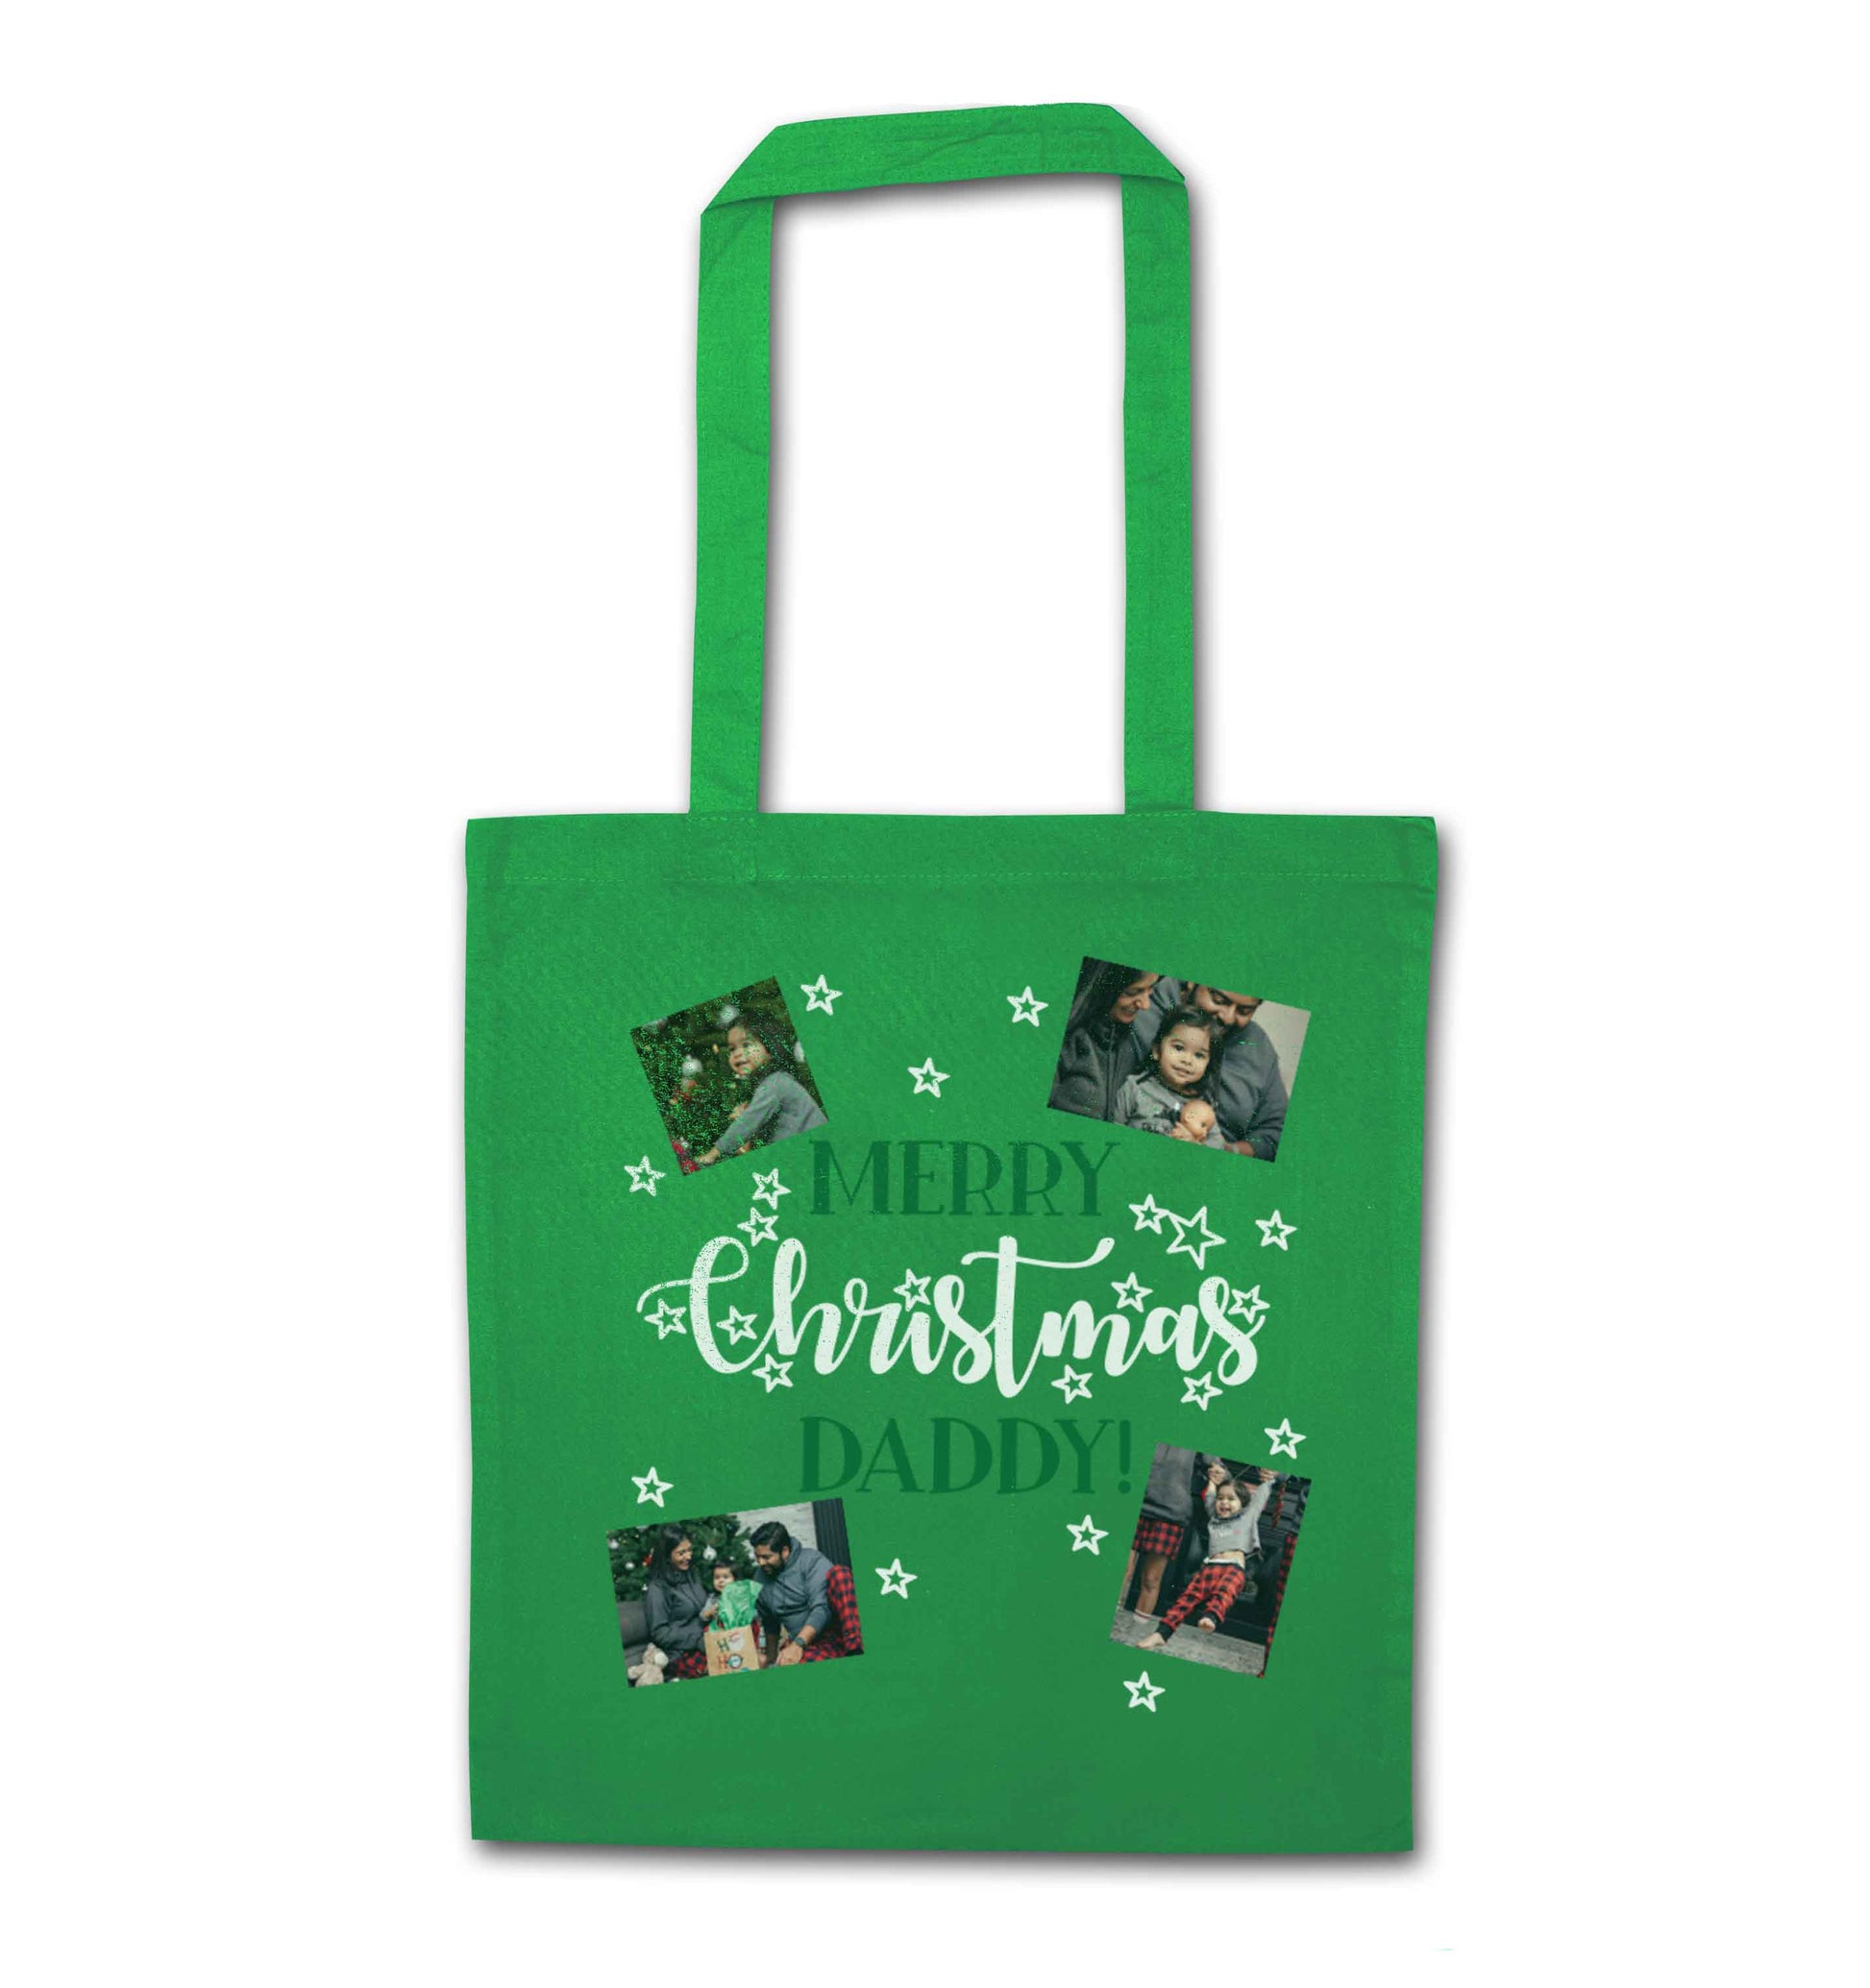 Merry Christmas daddy green tote bag